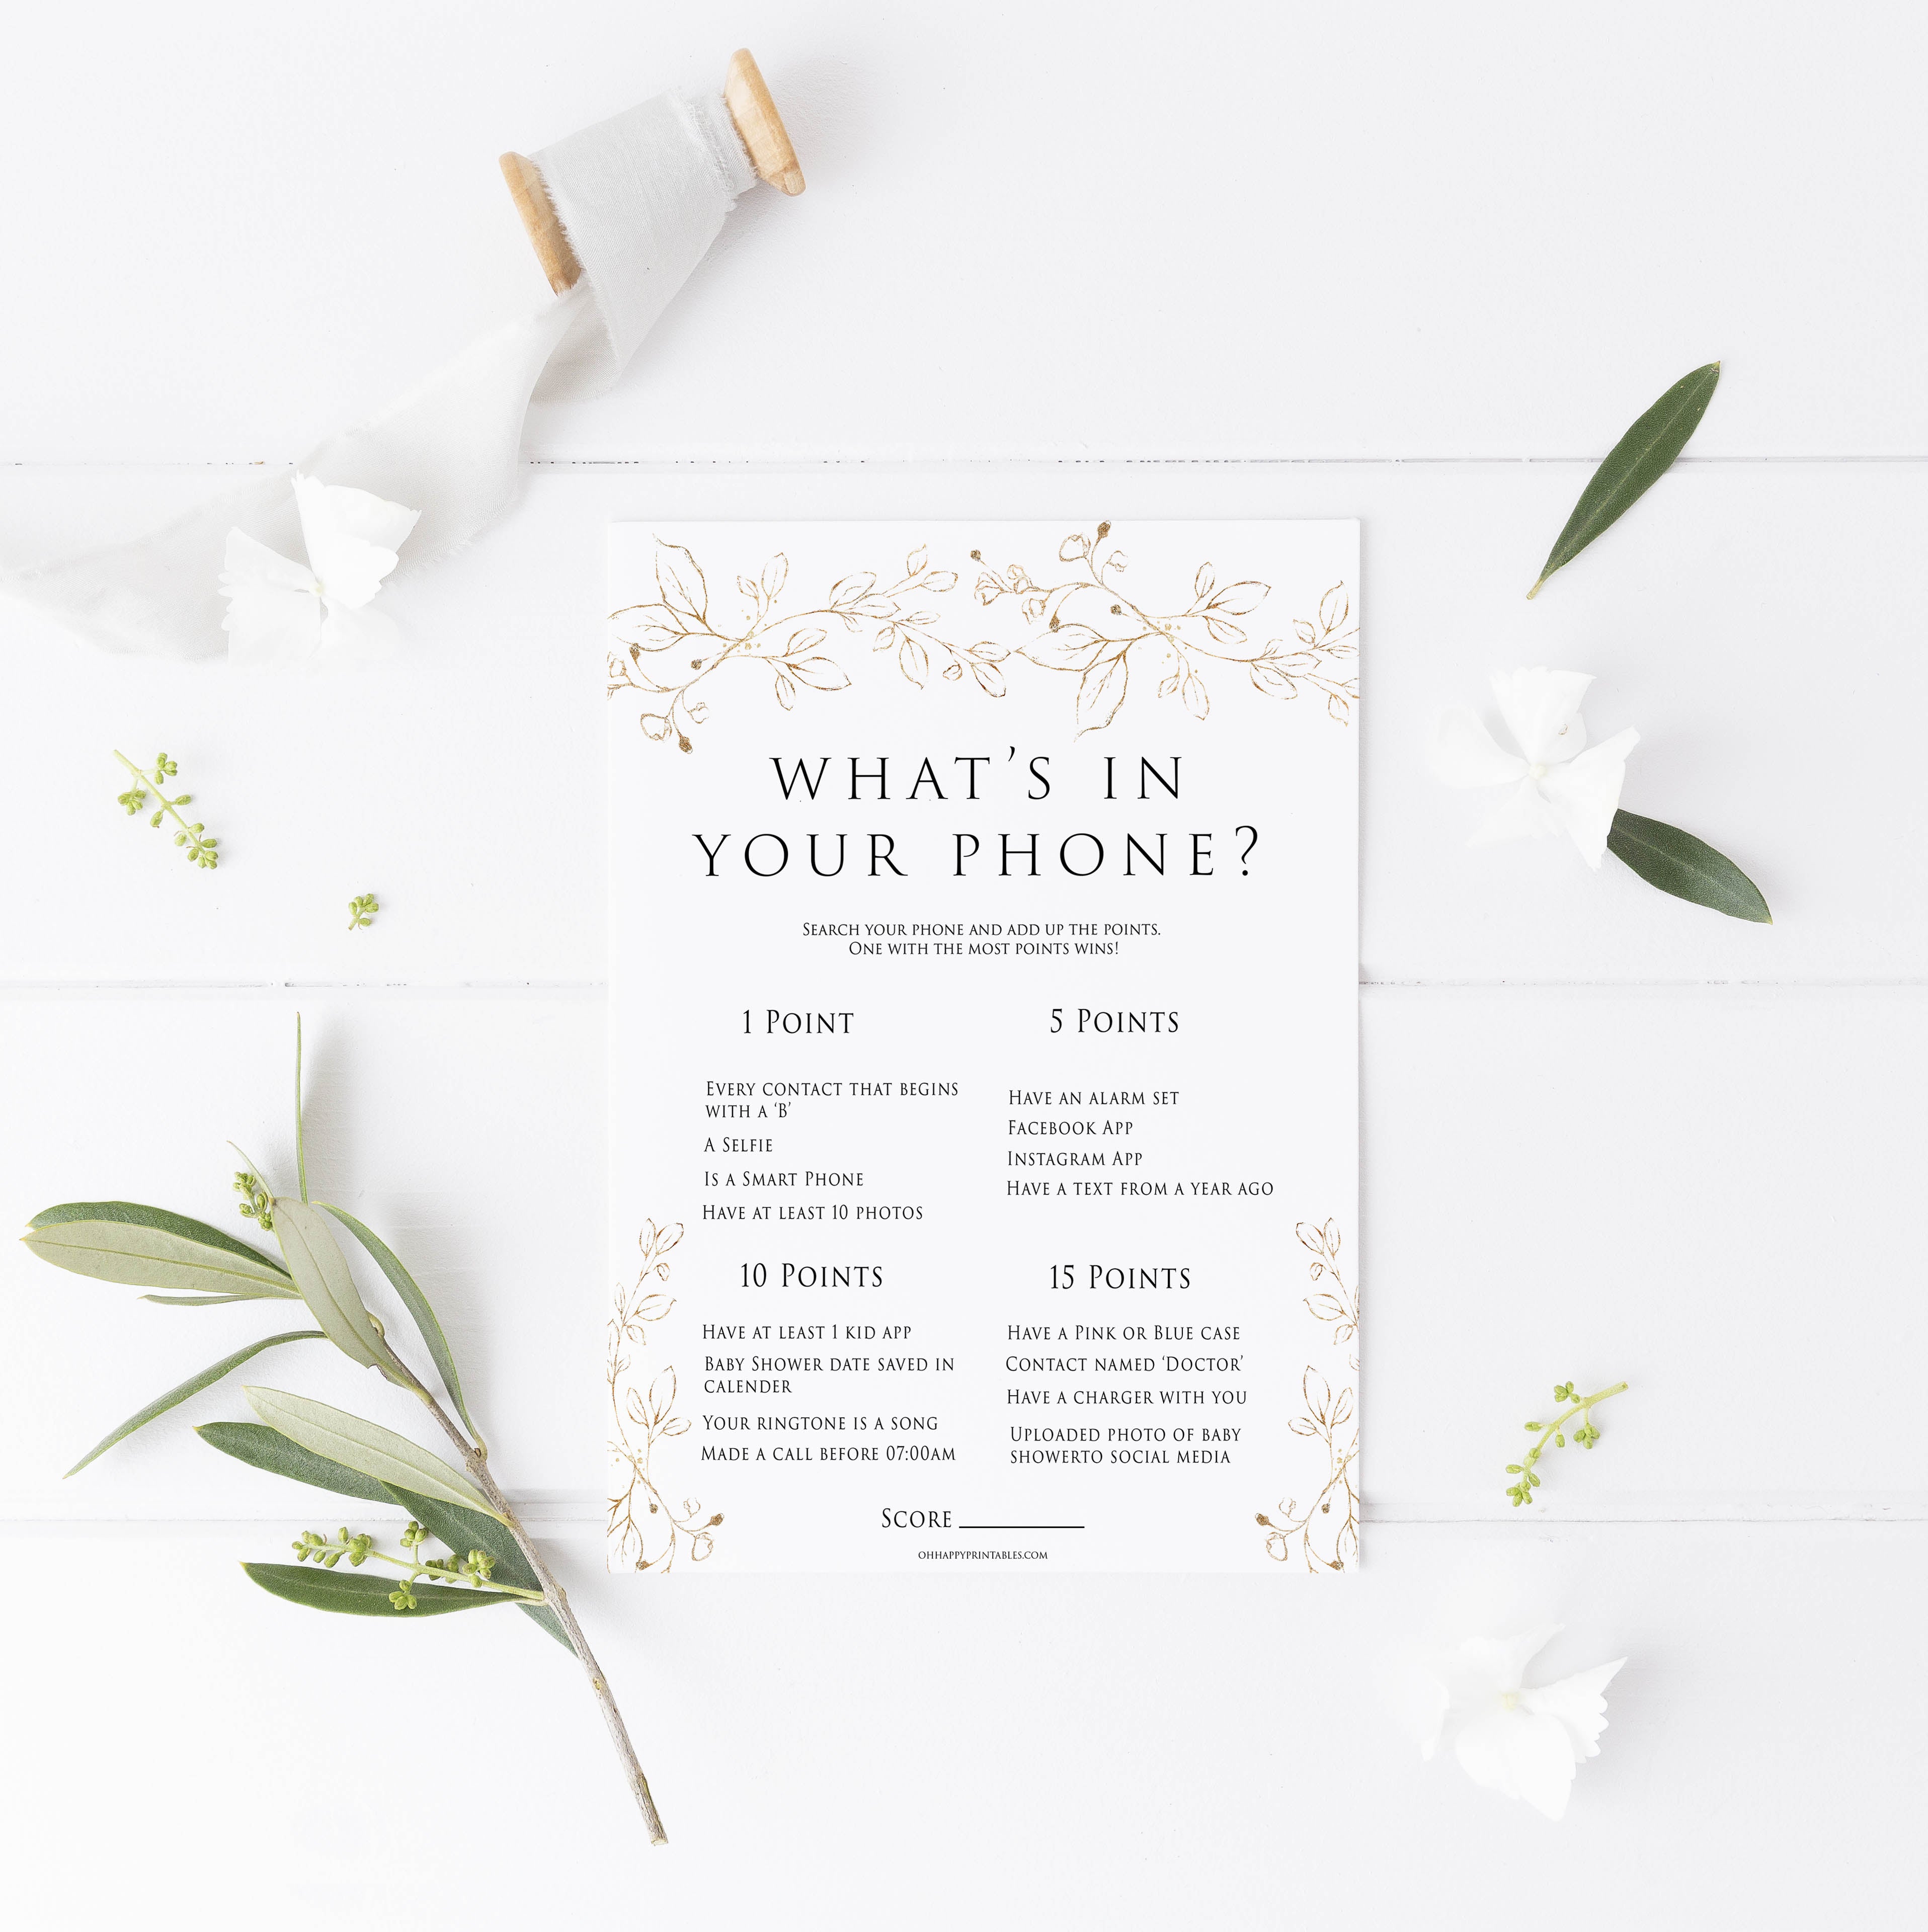 whats in your phone baby game, Printable baby shower games, gold leaf baby games, baby shower games, fun baby shower ideas, top baby shower ideas, gold leaf baby shower, baby shower games, fun gold leaf baby shower ideas